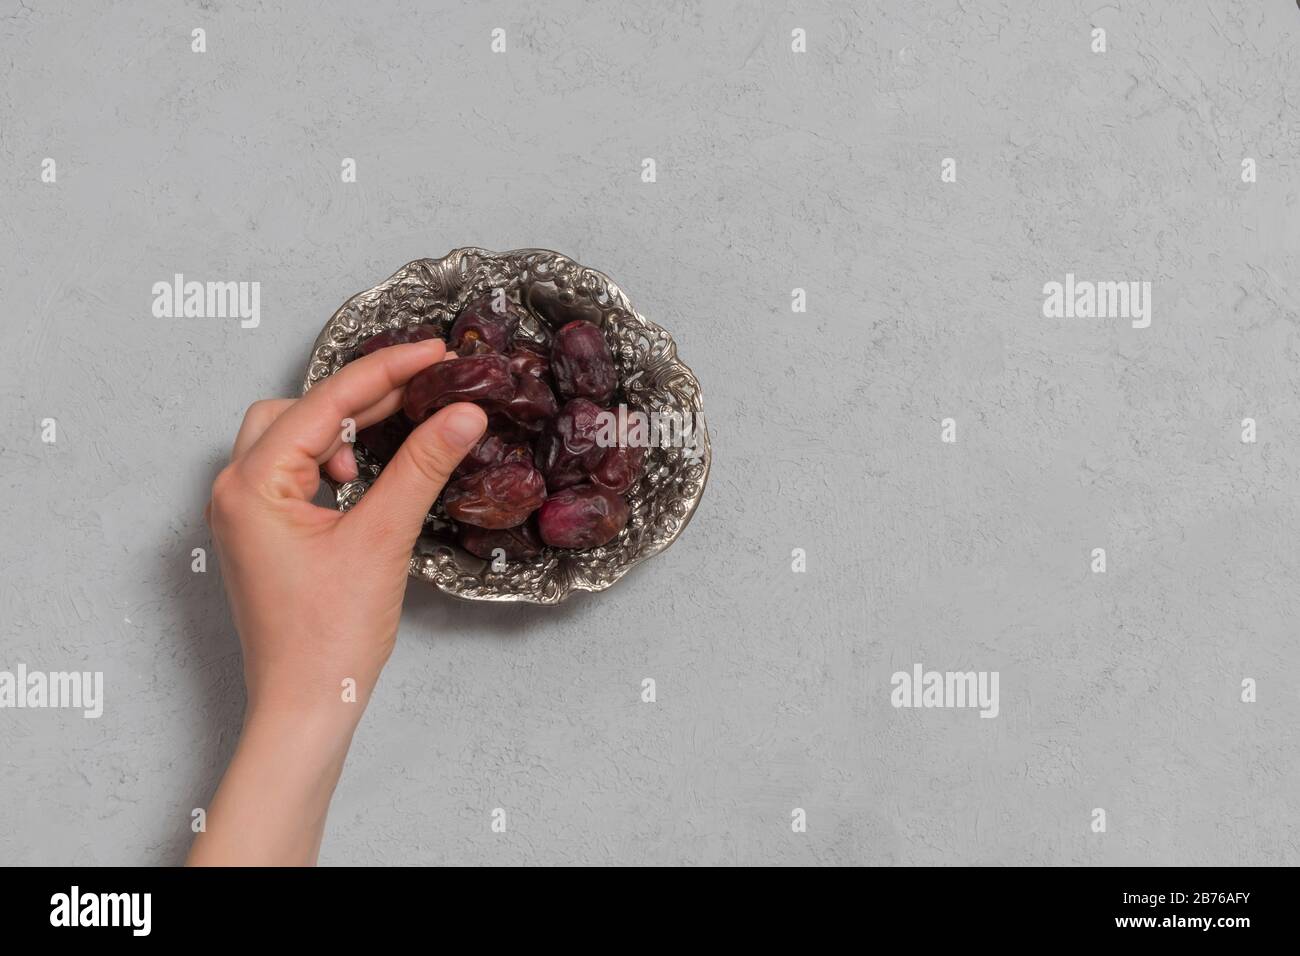 Woman hand holding dry date on neutral concrete background. Ramadan fasting concept. Top view with copy space Stock Photo